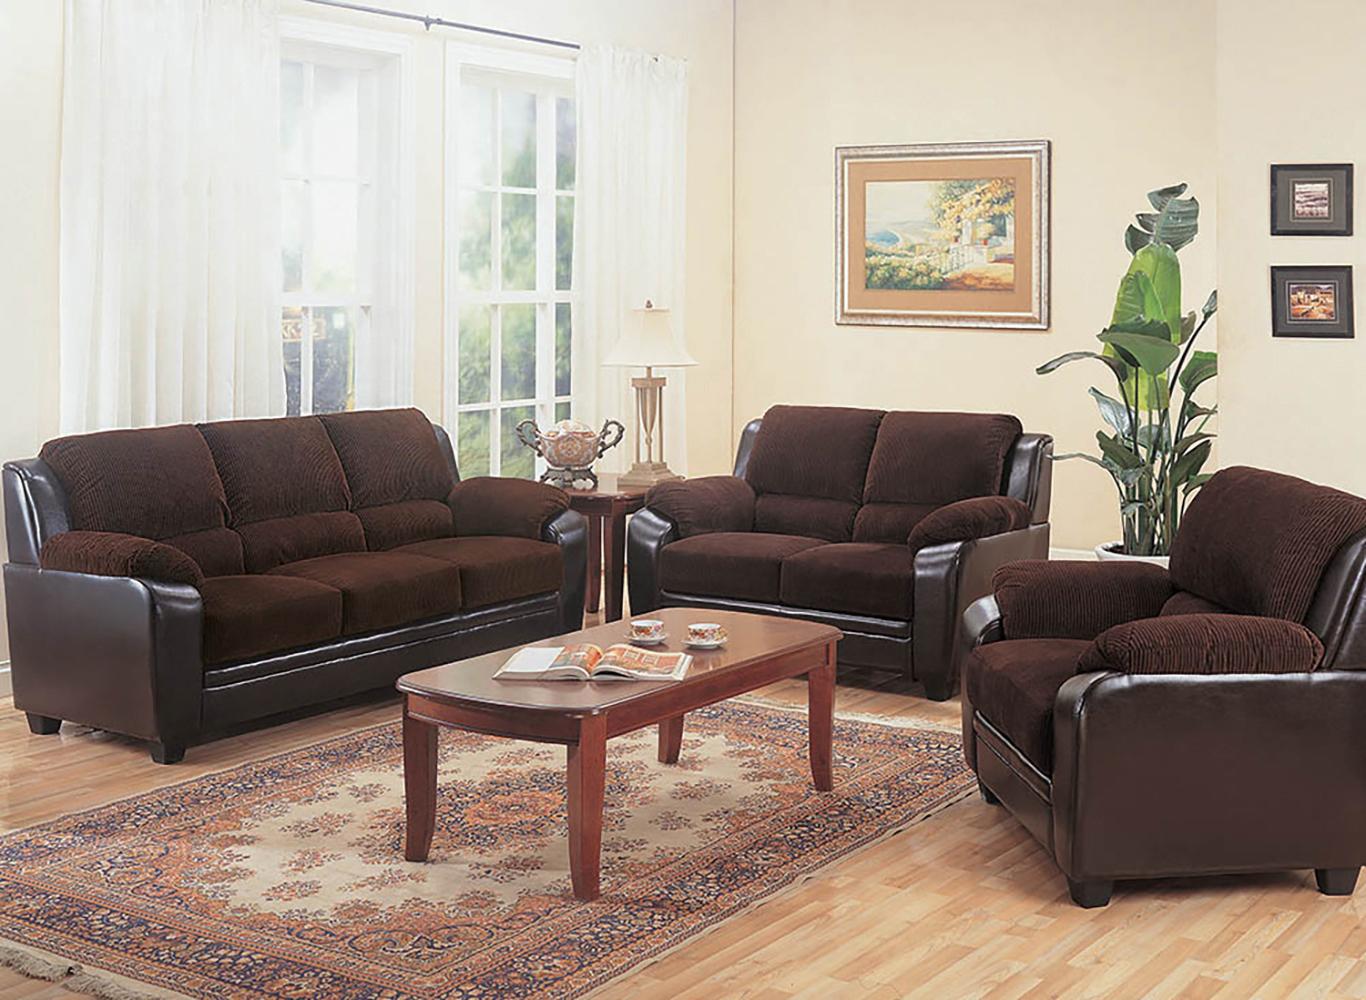 Contemporary Living Room Set 502811-S3 Monika 502811-S3 in Chocolate Leatherette